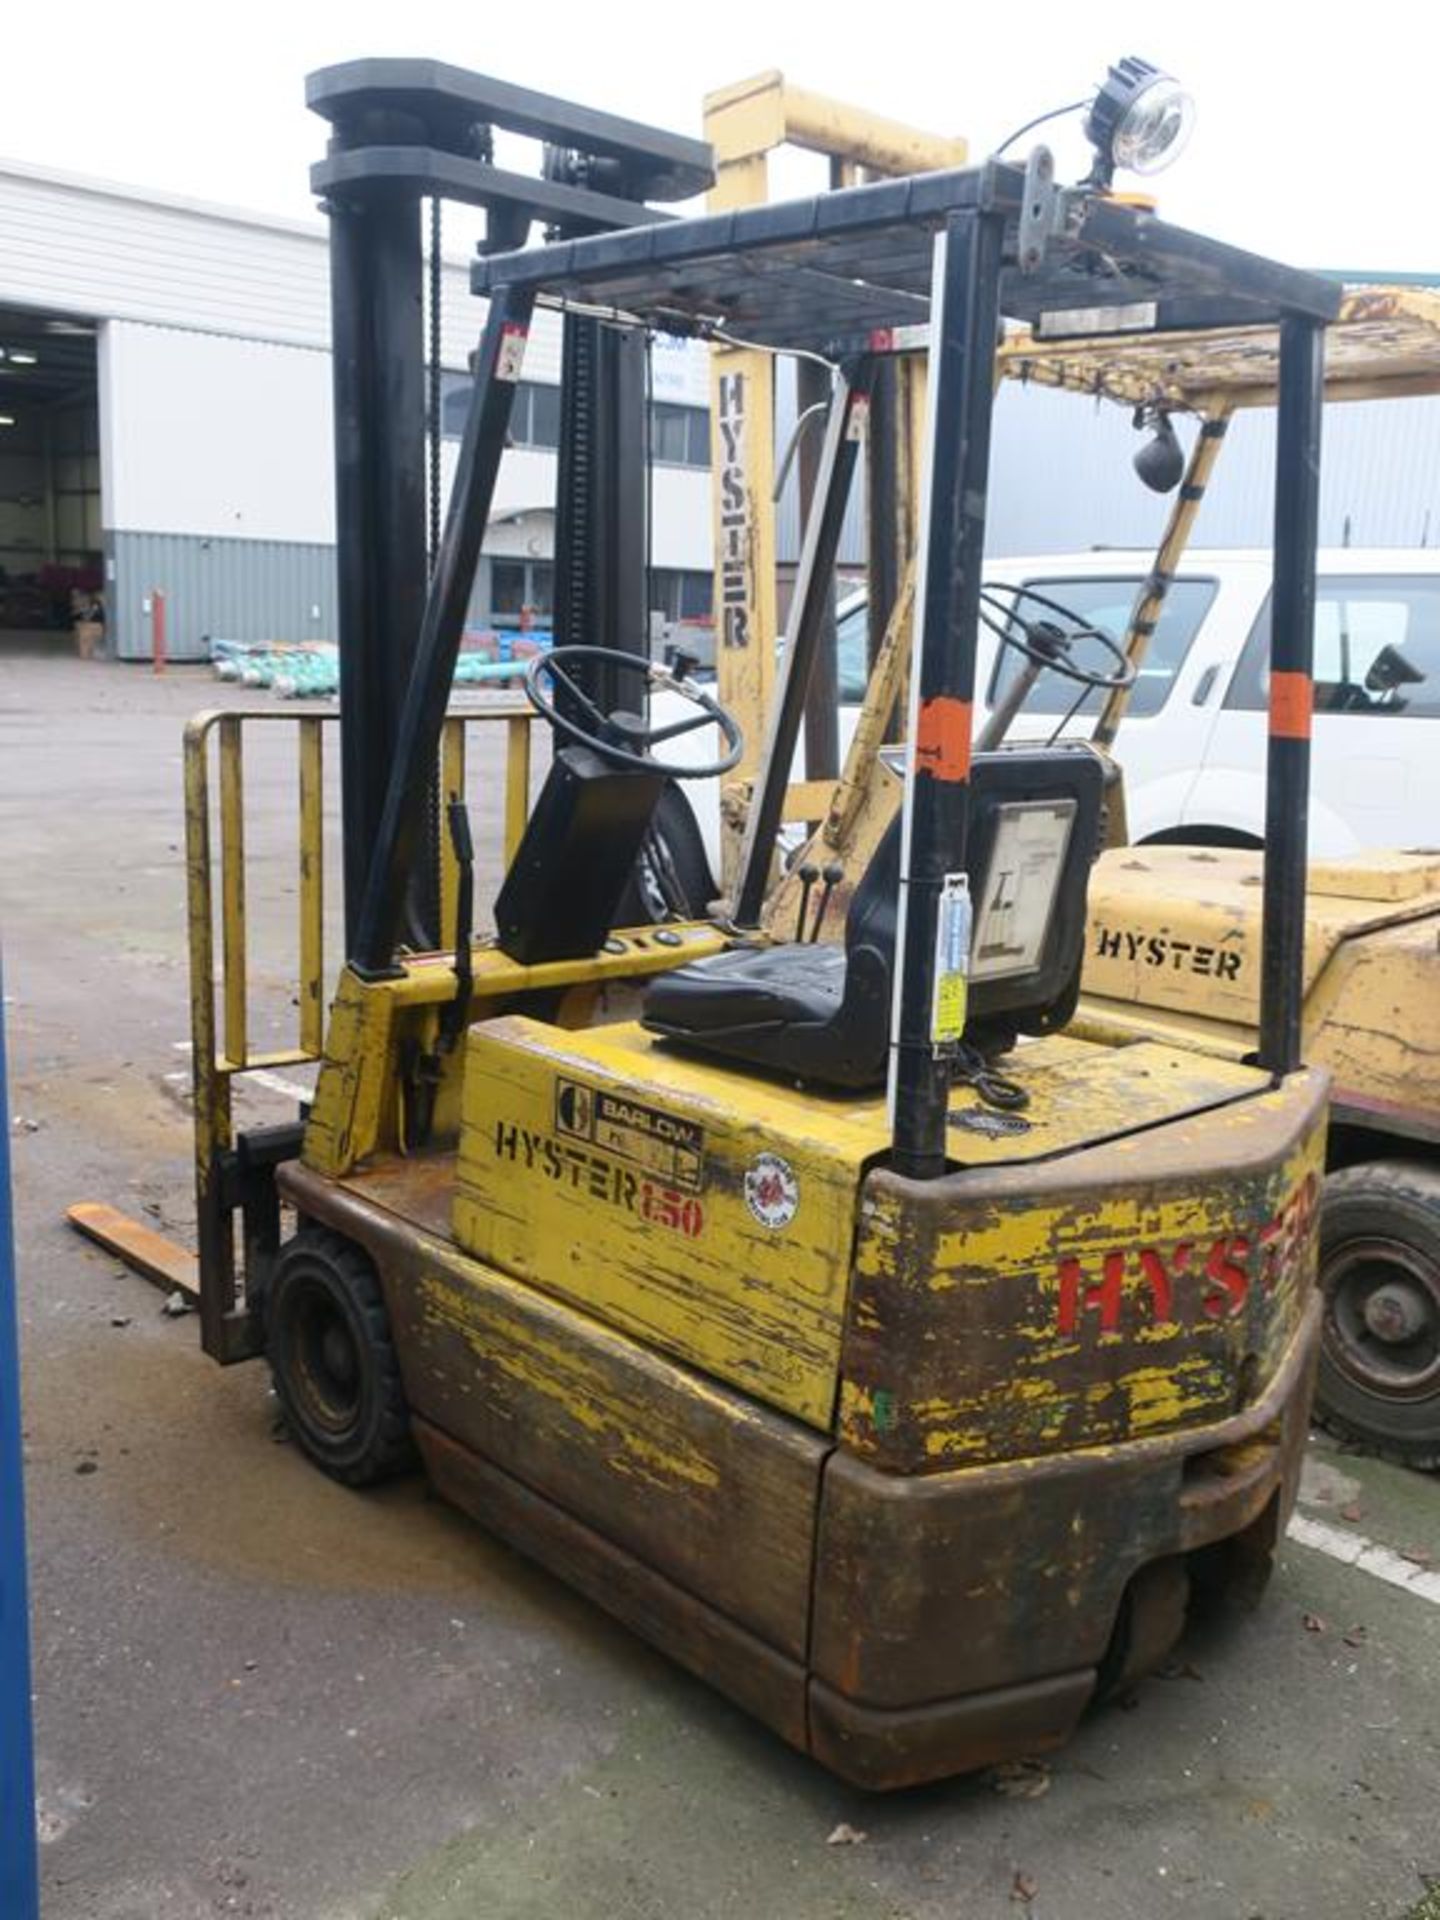 * Hyster 1.50 Electric Forklift with duplex mast and side shift, GNB 2100 LP charger. Please note - Image 6 of 9